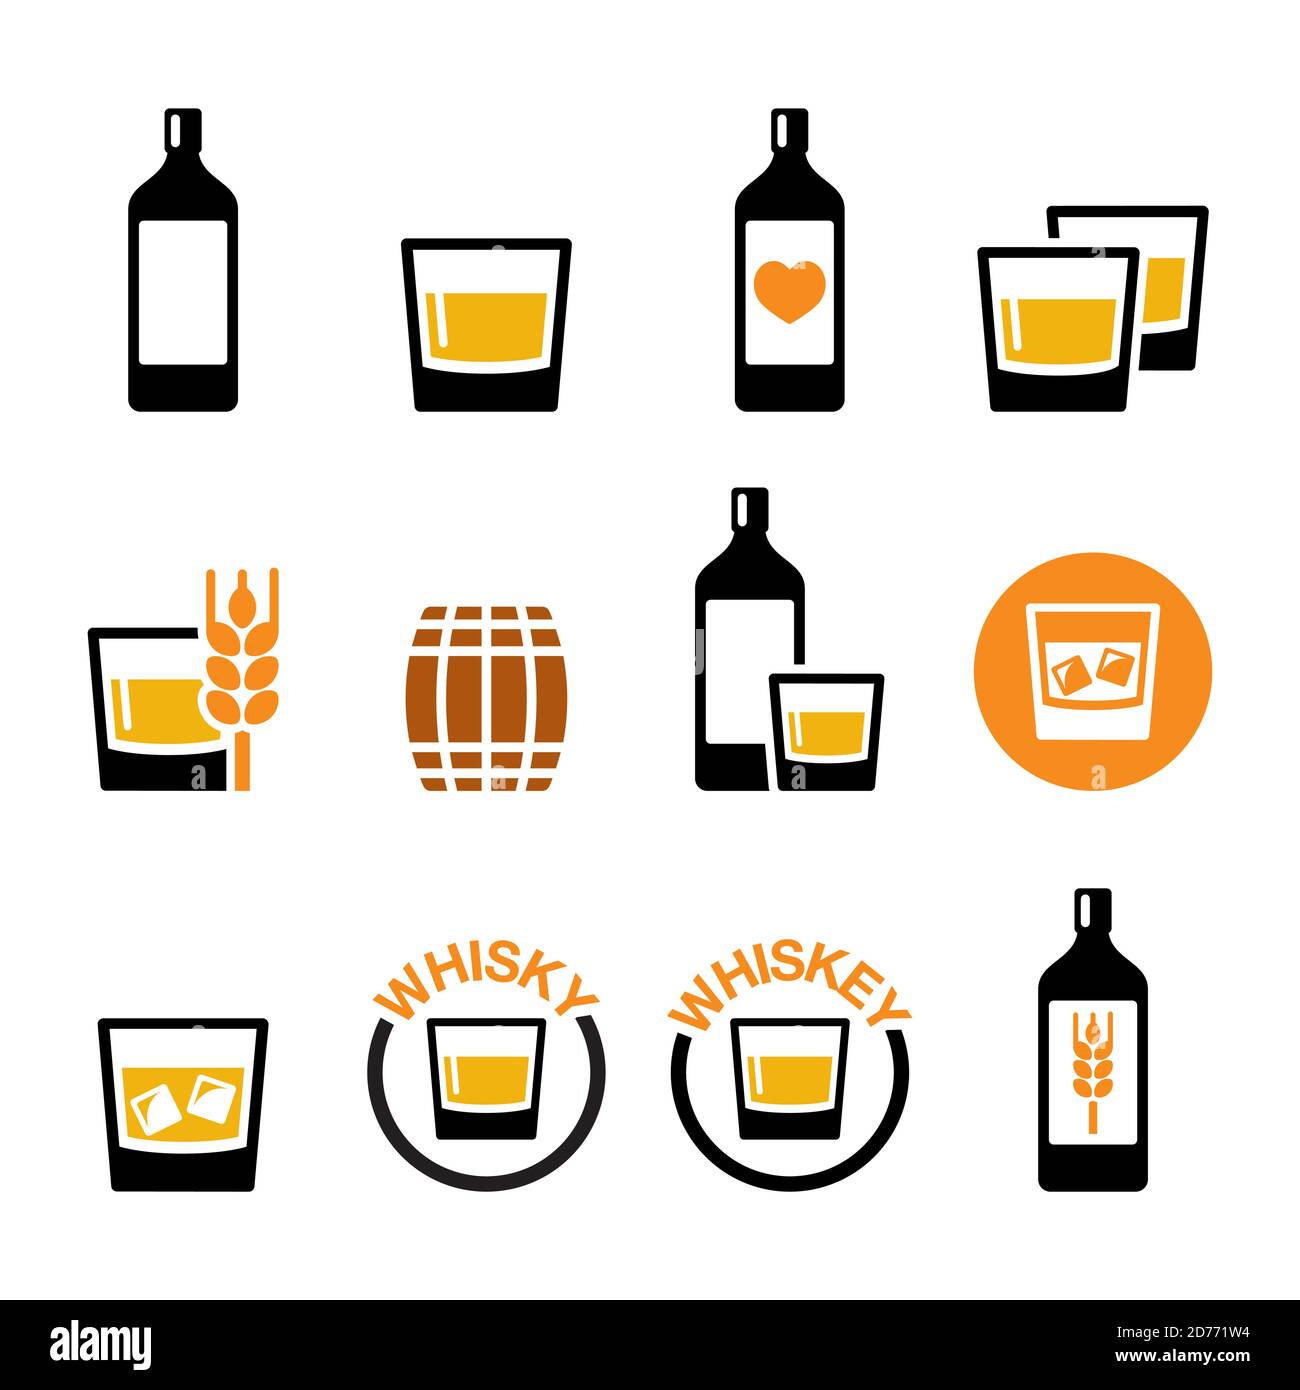 Whisky or Whiskey vector icon set - alcohol drink, pub and bar design Stock Vector